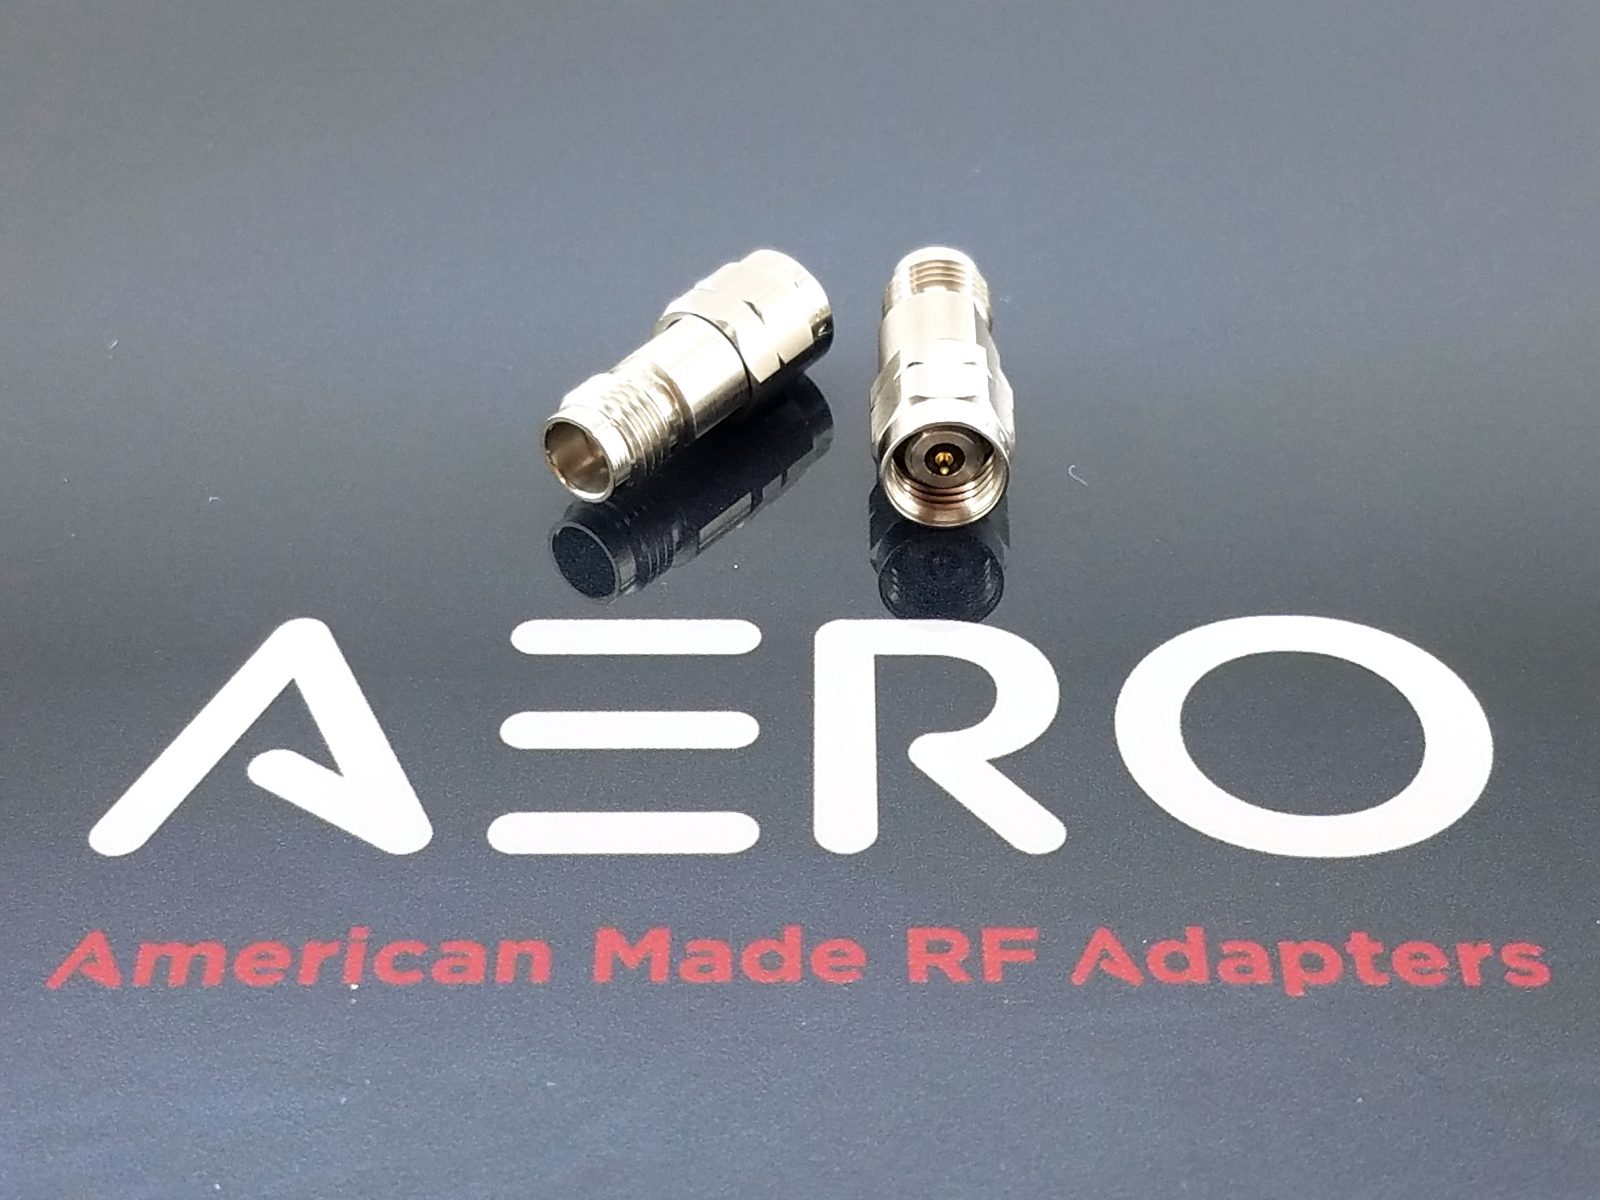 100% Made in USA New Aero 50 GHz High Performance 2.4mm Female to Male Adapter 